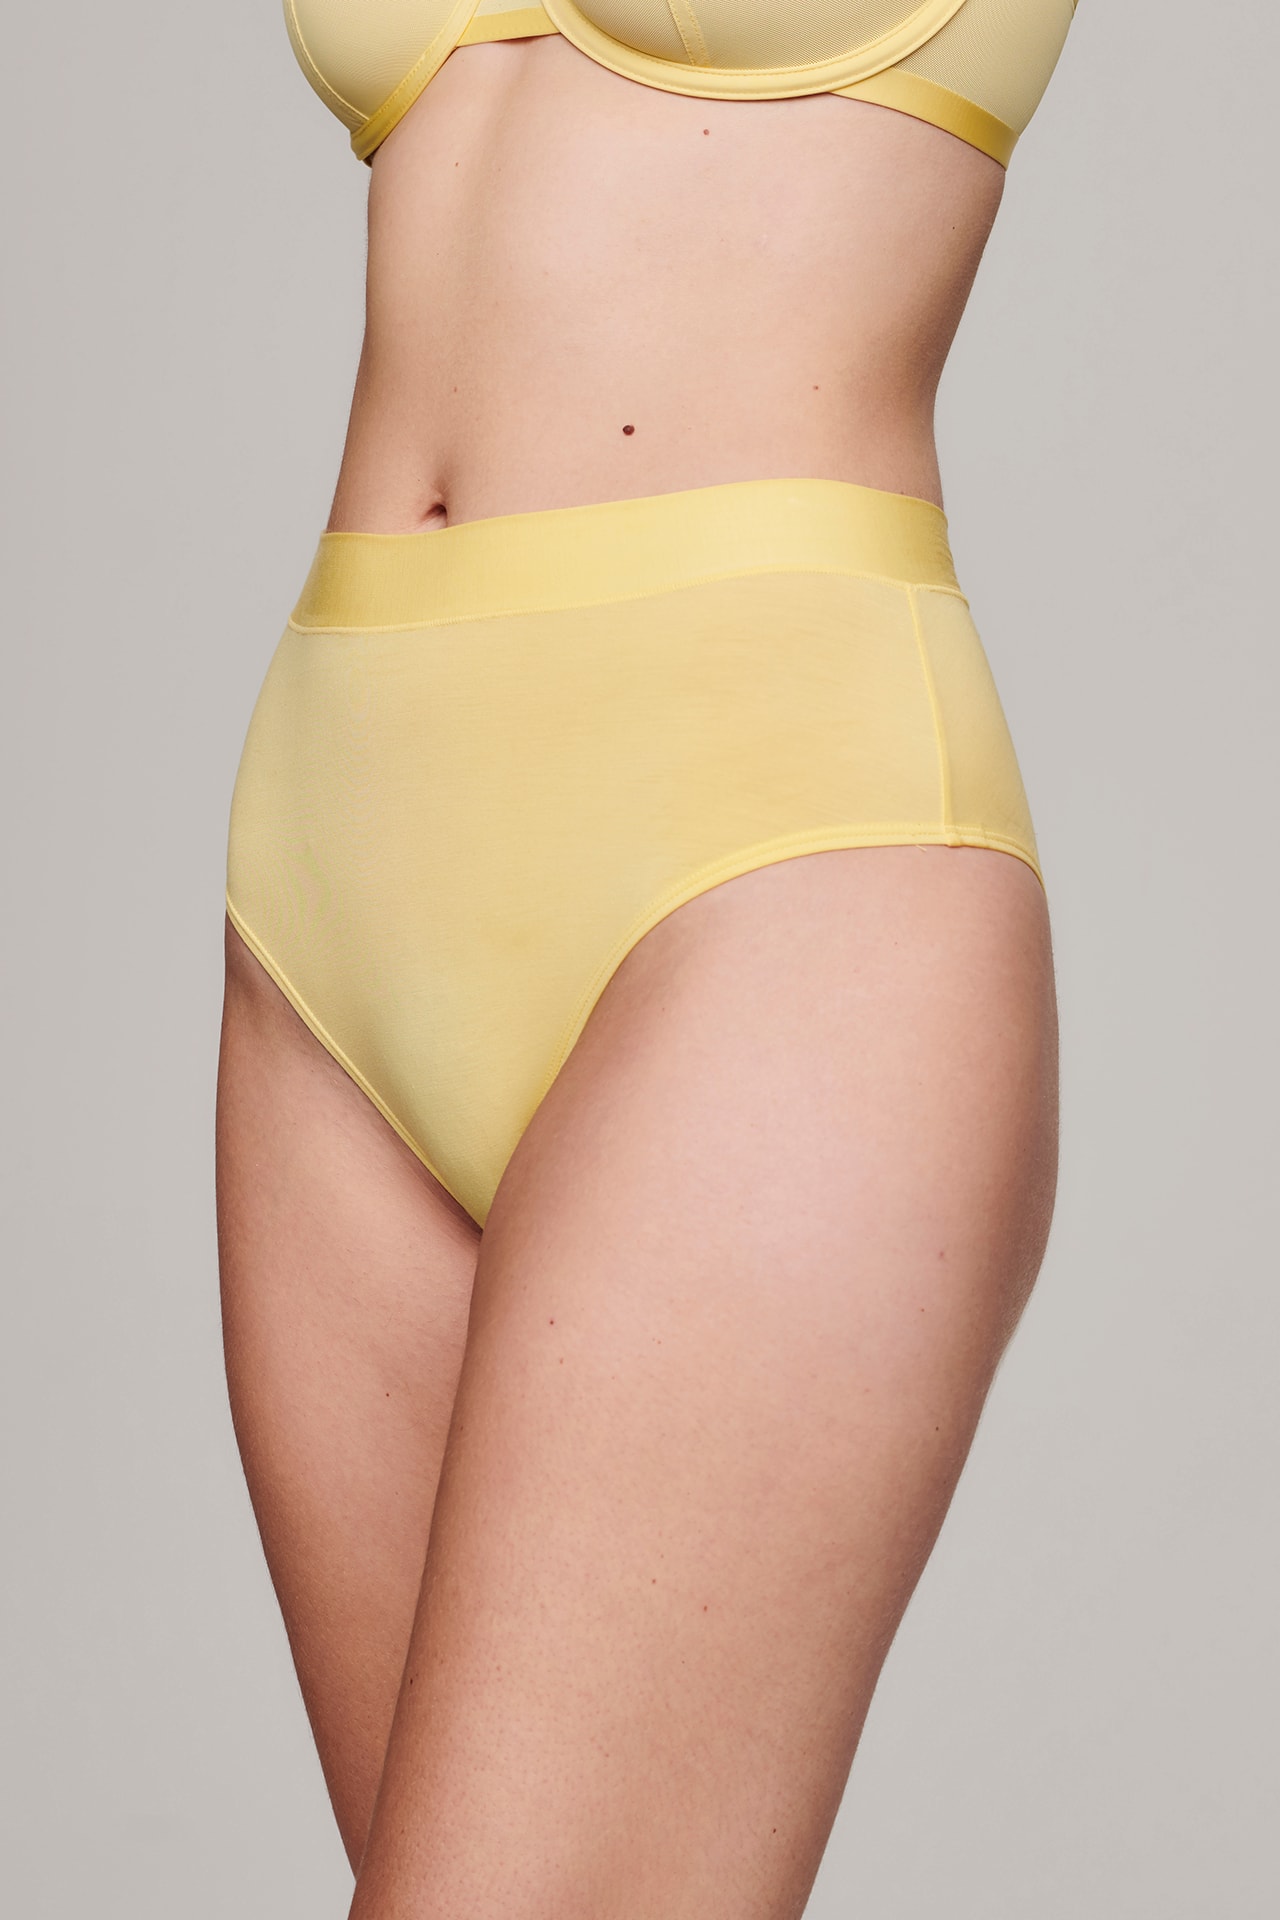 CUUP Introduces New Golden Hour-Inspired Colorways for Its Underwear